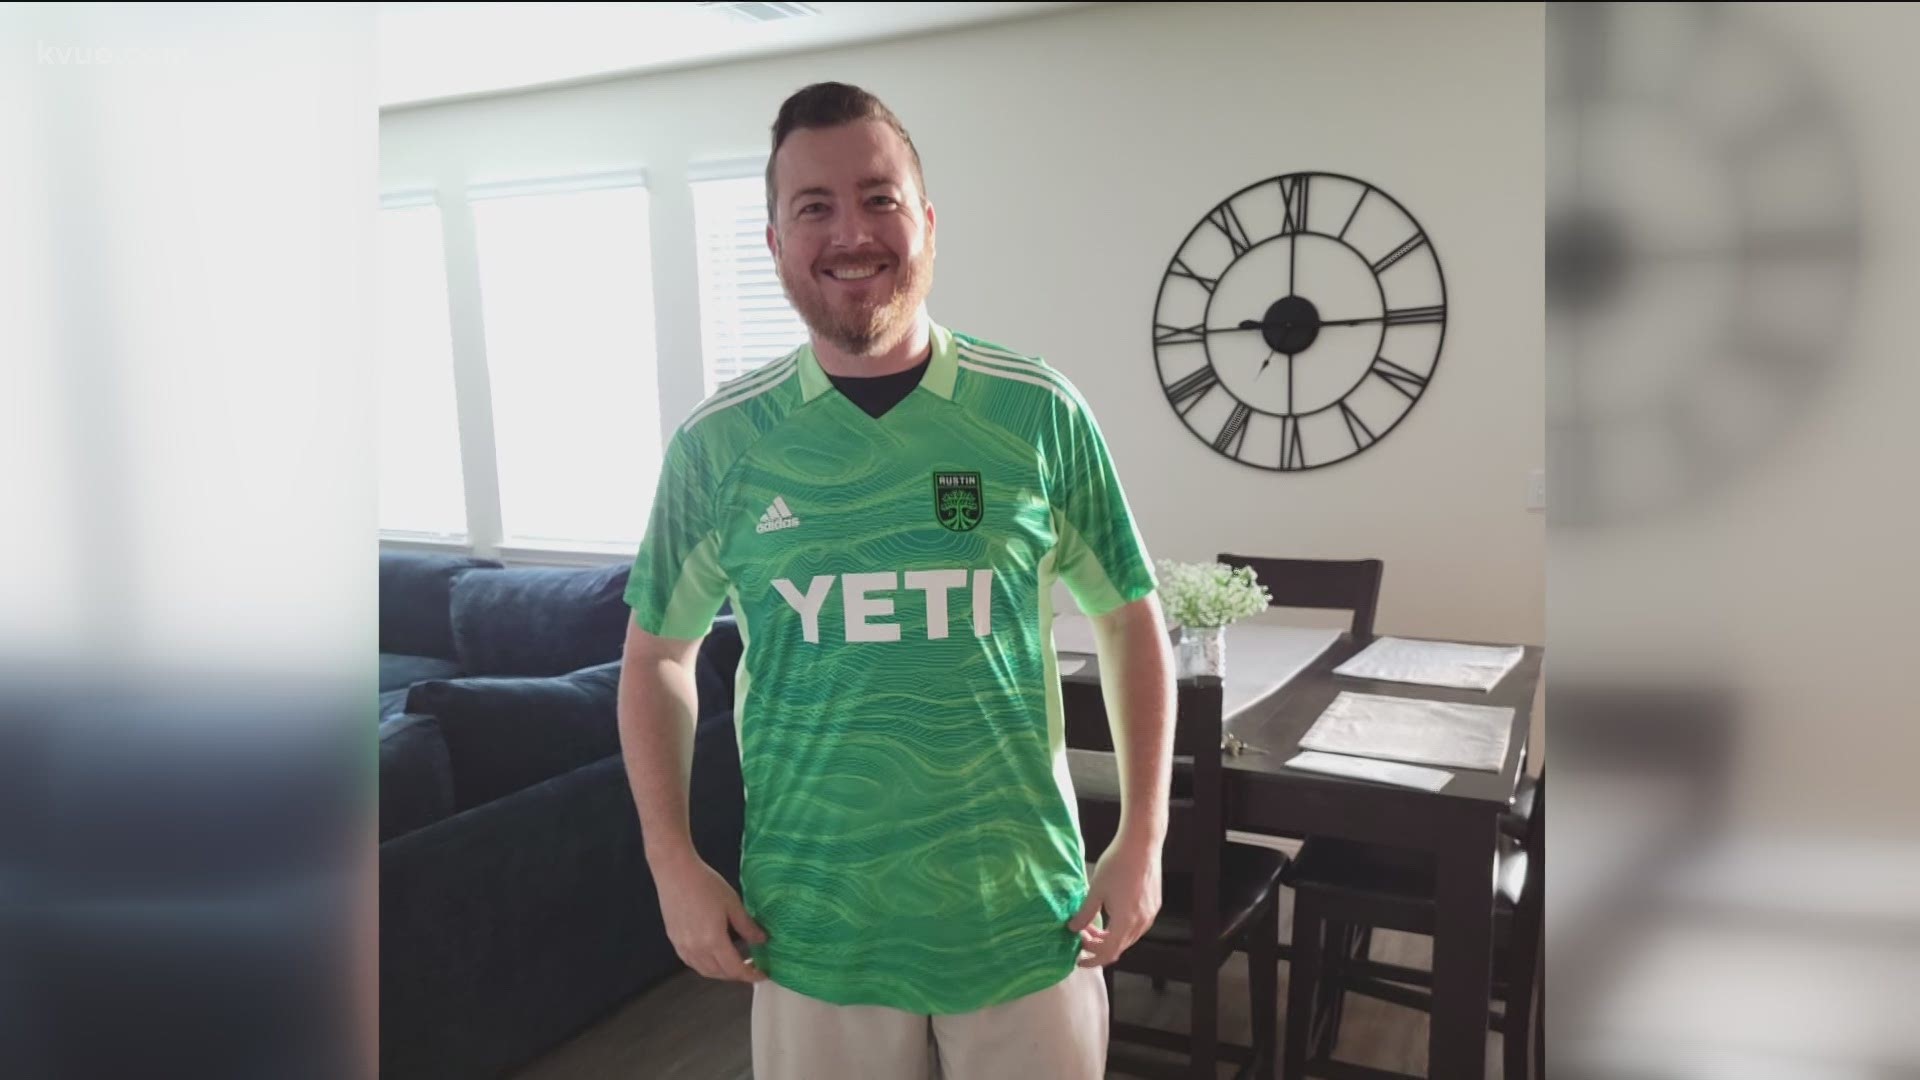 One Austin FC fan got his wish to get a different kind of jersey made to rock on game day. KVUE's Emily Giangreco explains.